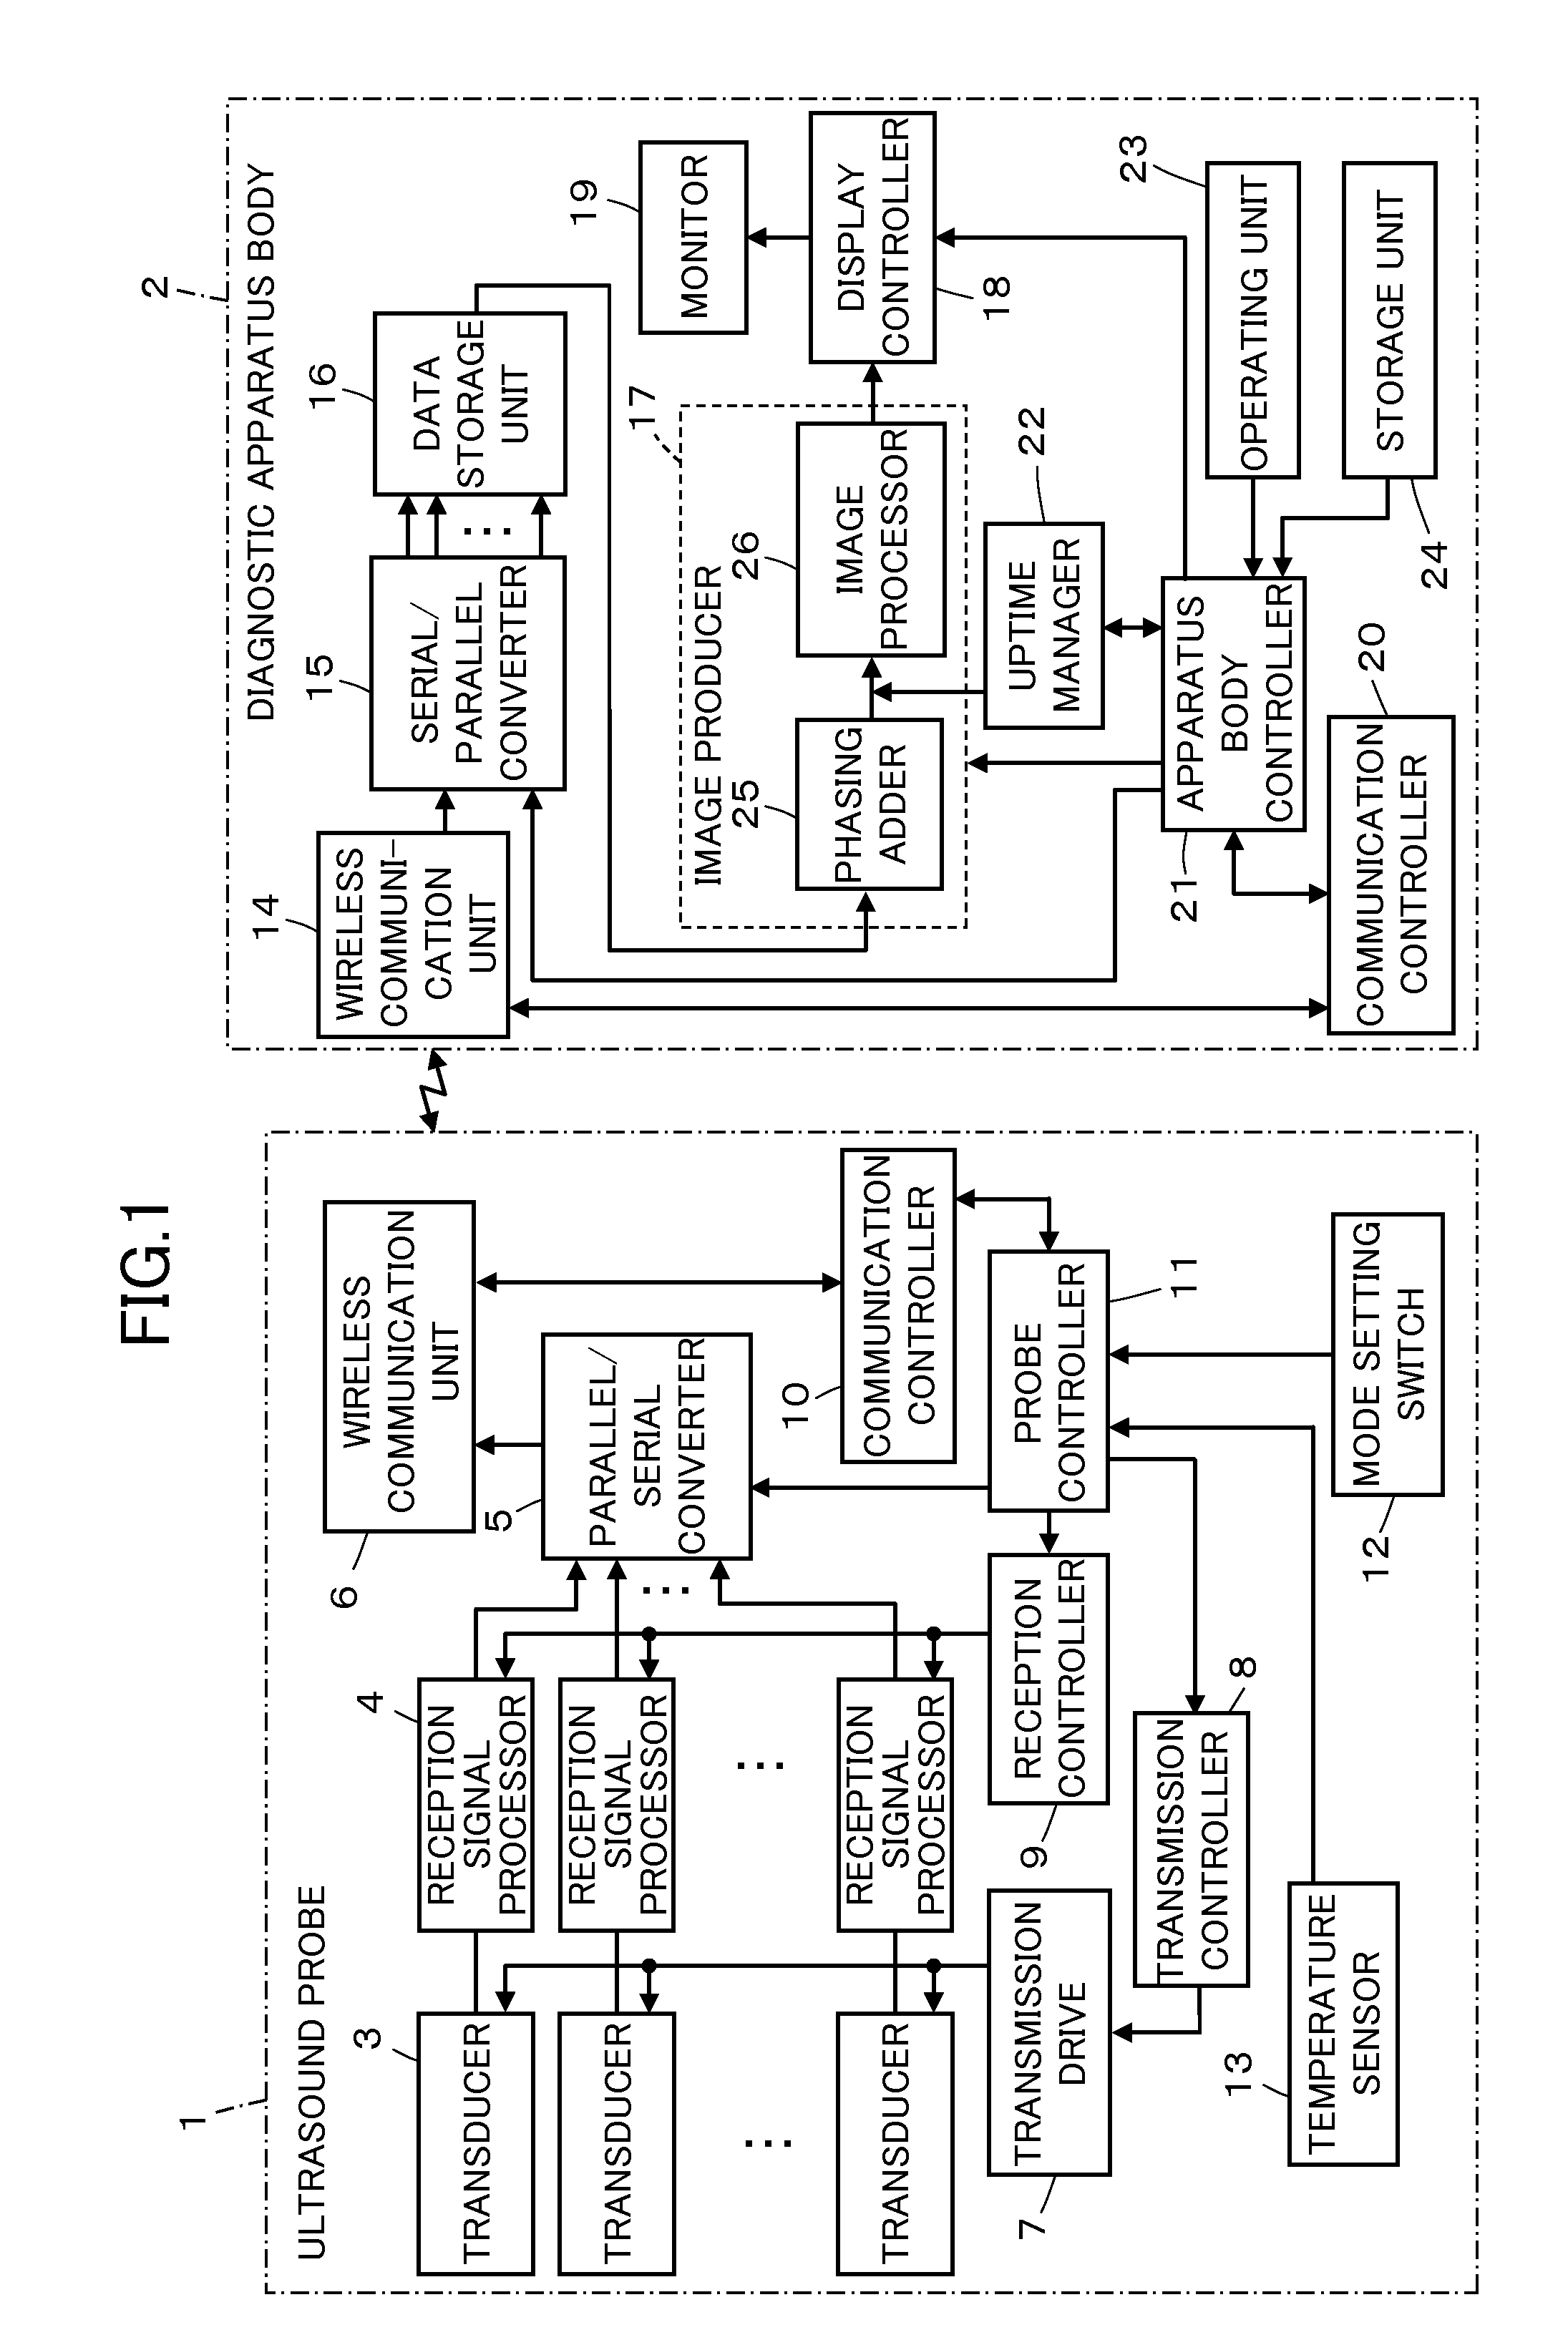 Ultrasound diagnostic apparatus and ultrasound image producing method